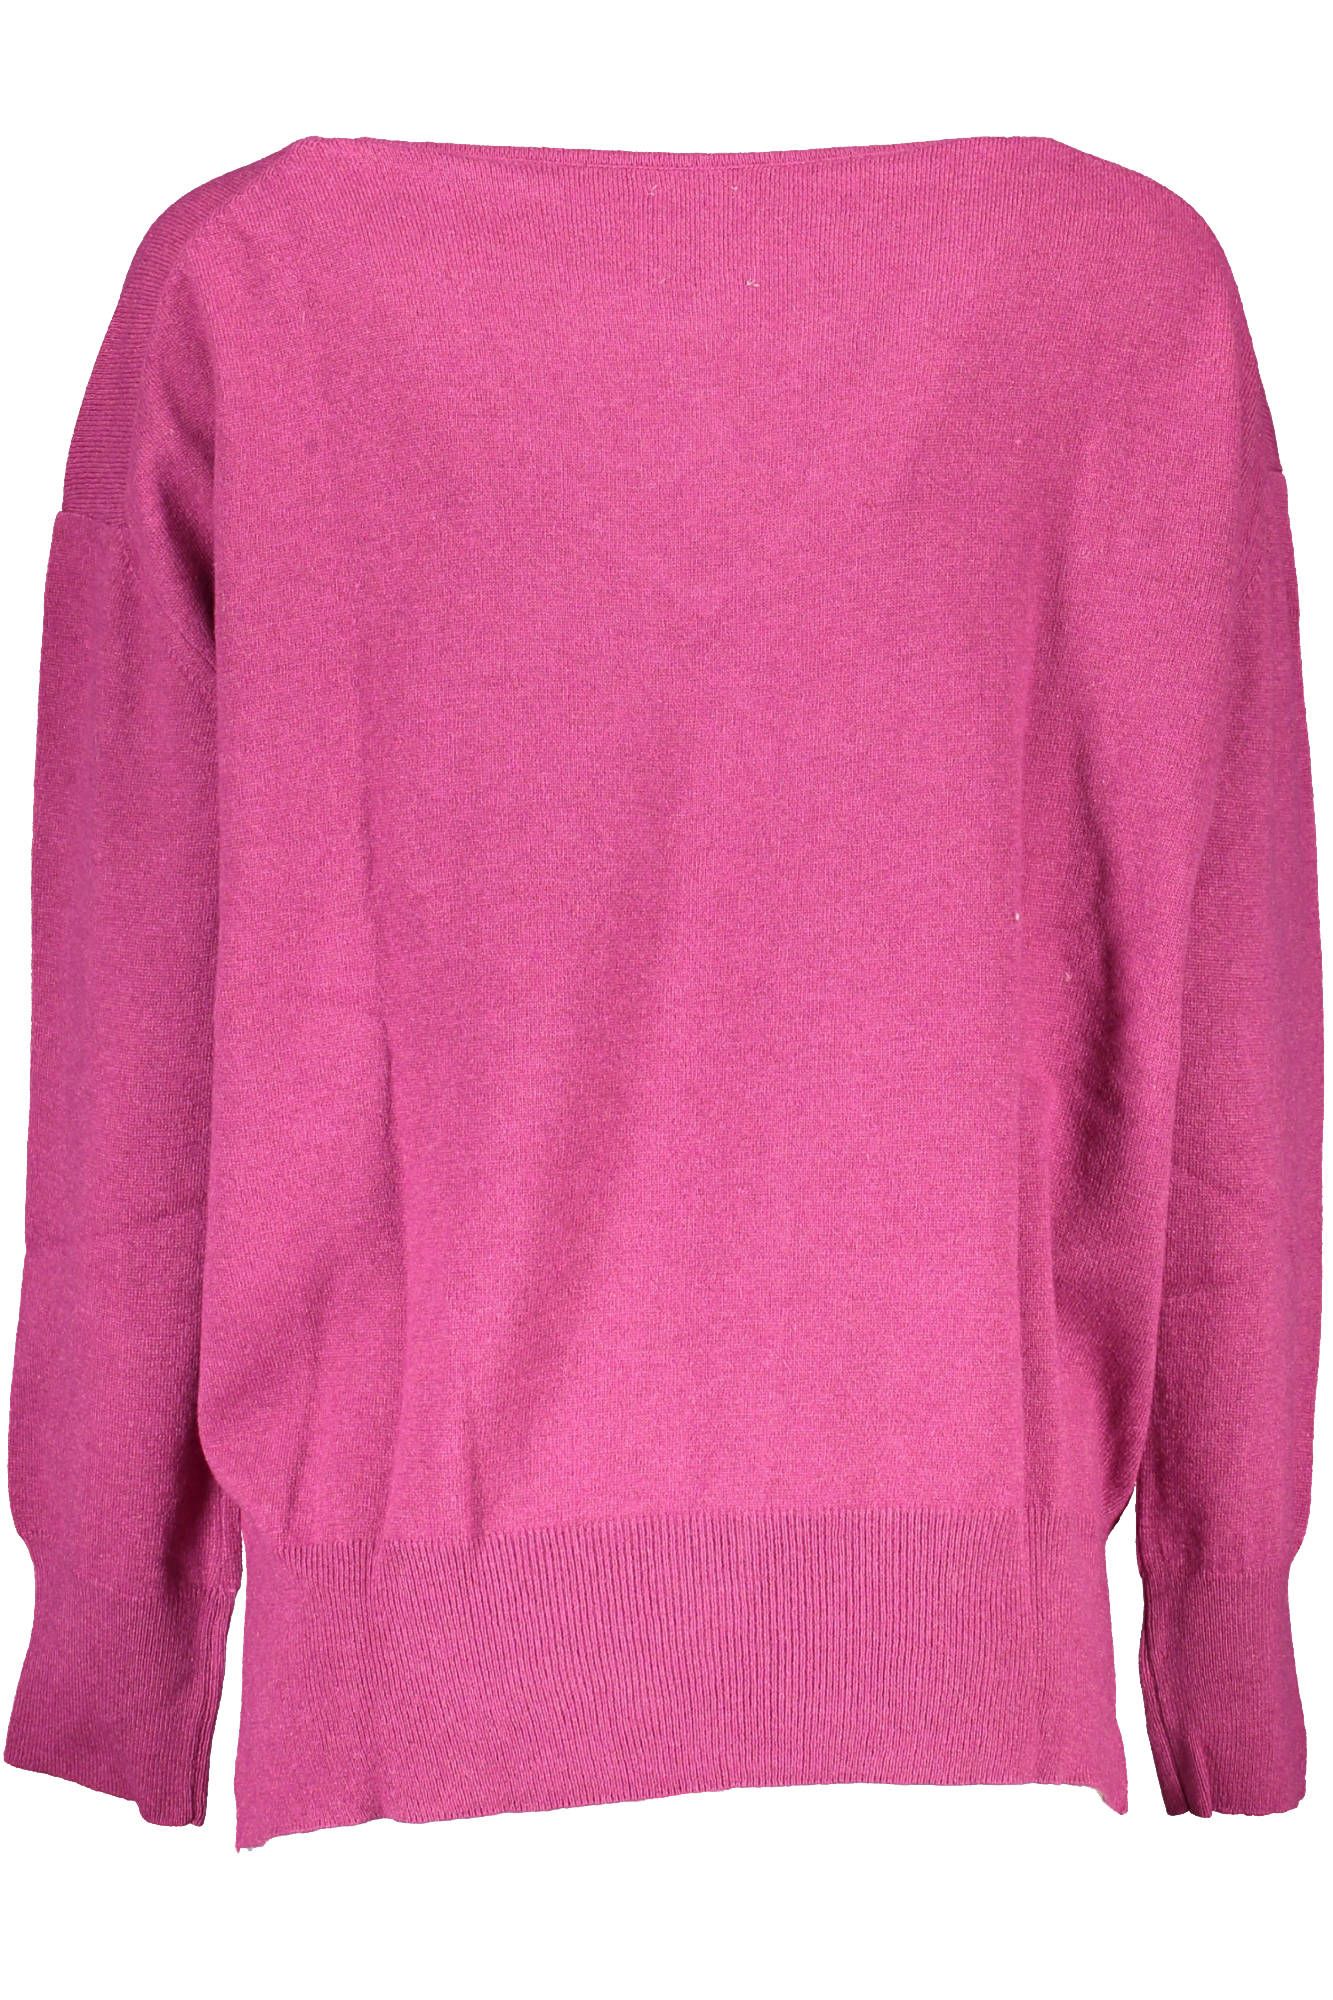 North Sails Eco-Chic Purple Wool Blend V-Neck Sweater